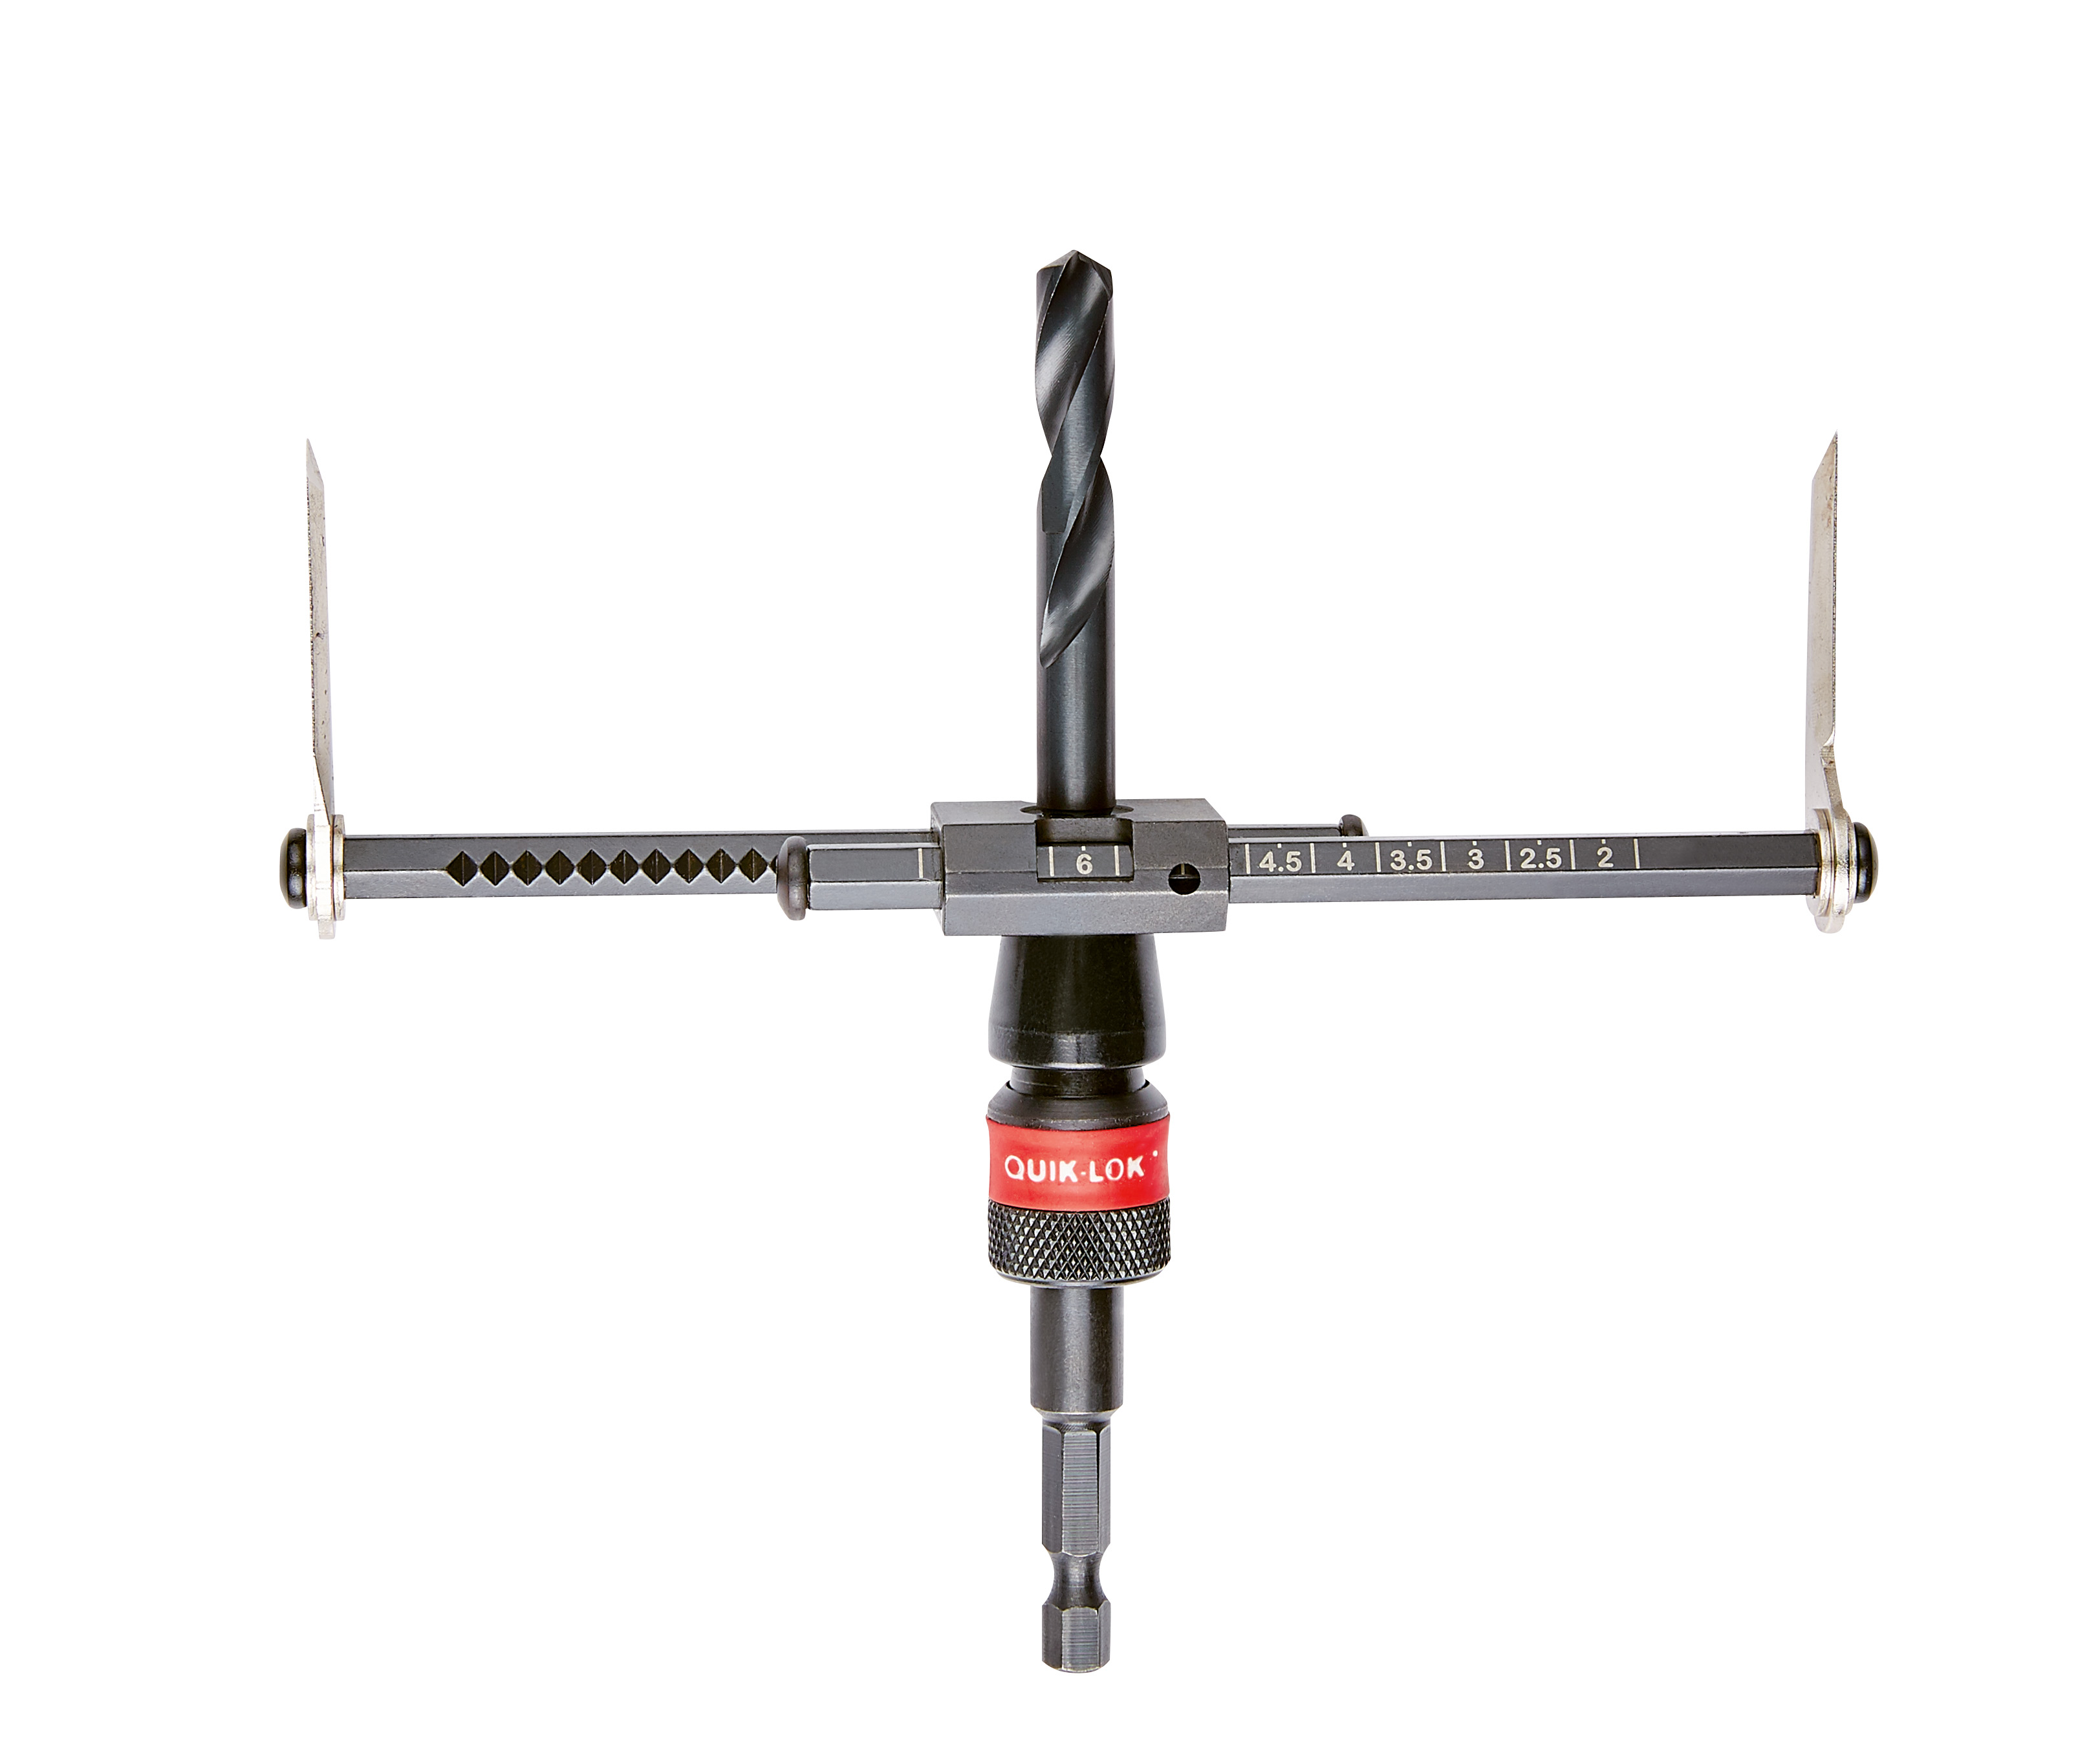 The Milwaukee® adjustable hole cutter offers a one-size-fits all solution to make holes in drywall and ceiling tile. Cutting diameters range from 2 in. to 7 in. with 1/4 in. increments for almost double the amount of sizes over the competition. Utilizing a Quik-Lok™ arbor for tool-free locatability as well as laser etched markings and size indicator, users can quickly and easily identify and change sizes without the use of a hex key. A best-in-class durable and reusable debris shield with spring collar keeps cutting blades level and work areas clean, especially in over-head cutting applications. Choose the Milwaukee® adjustable hole cutter for applications in drywall and ceiling tiles including: recessed lights, audio speakers, fire/security systems, and clearance holes. Replacement blades and pilot bit (49-56-0290).